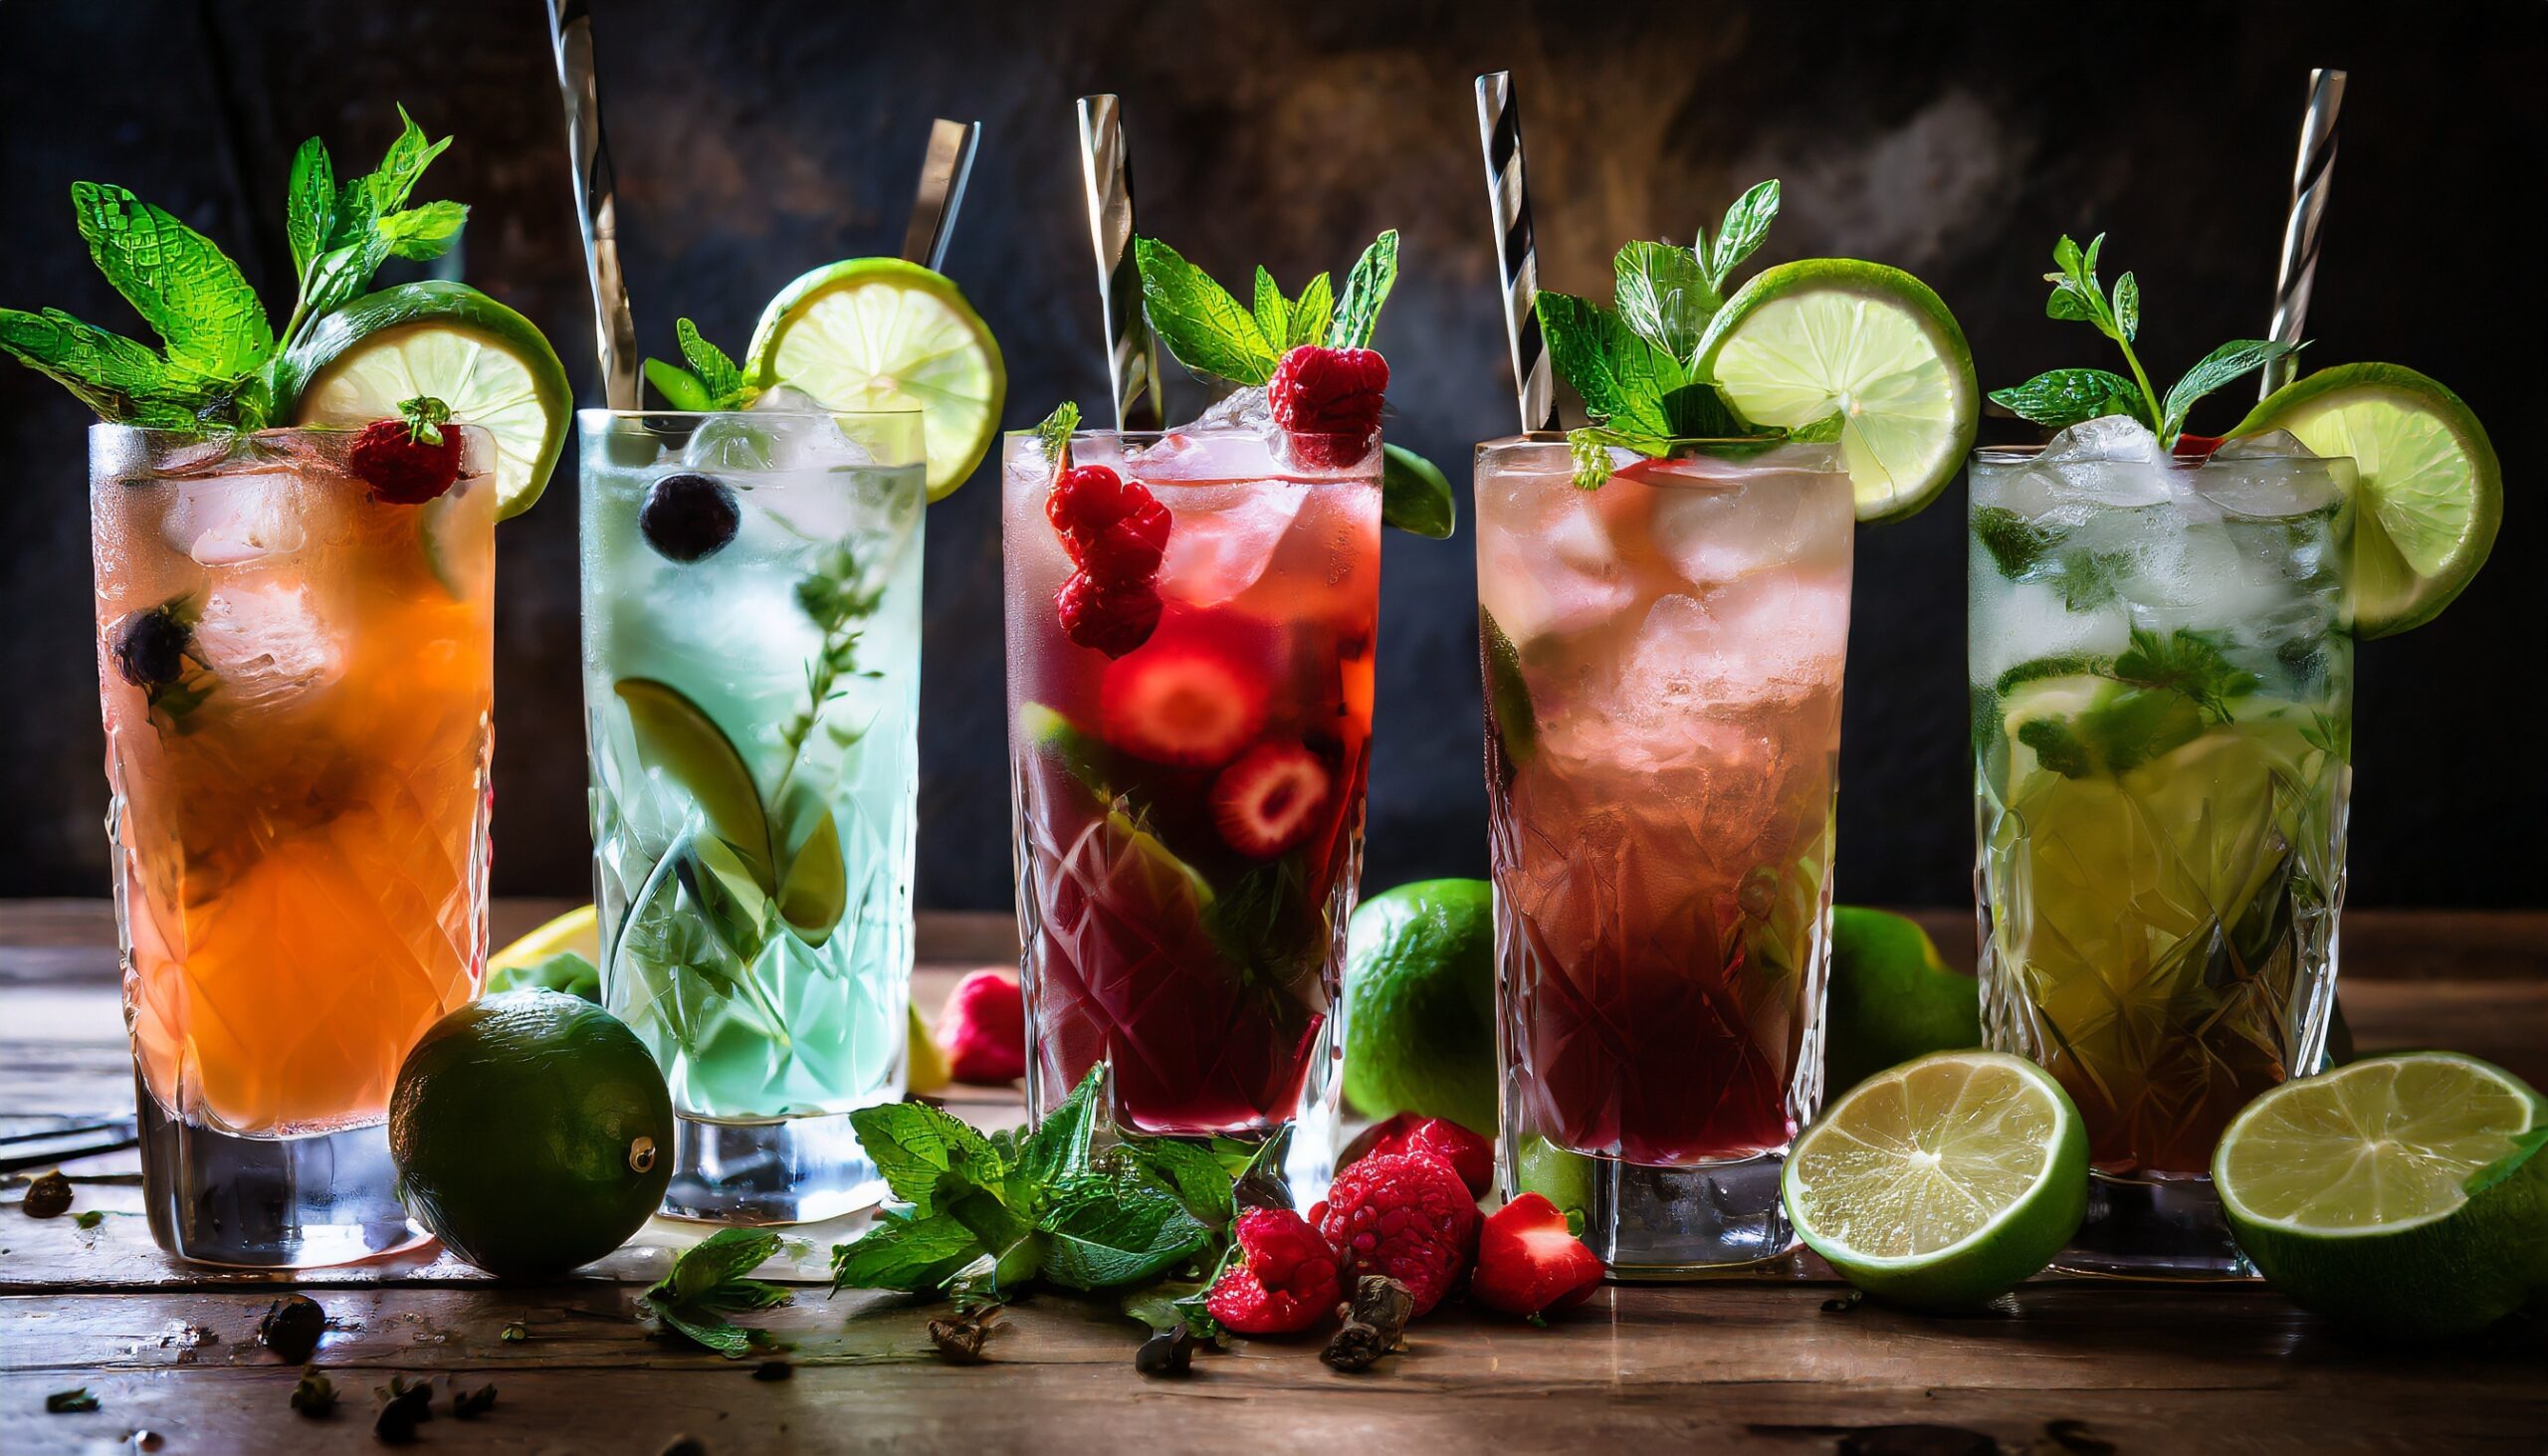 This picture is of several glasses of mocktails drinks, The drinks are in classic long glasses  with berries, lime, herbs and ice.